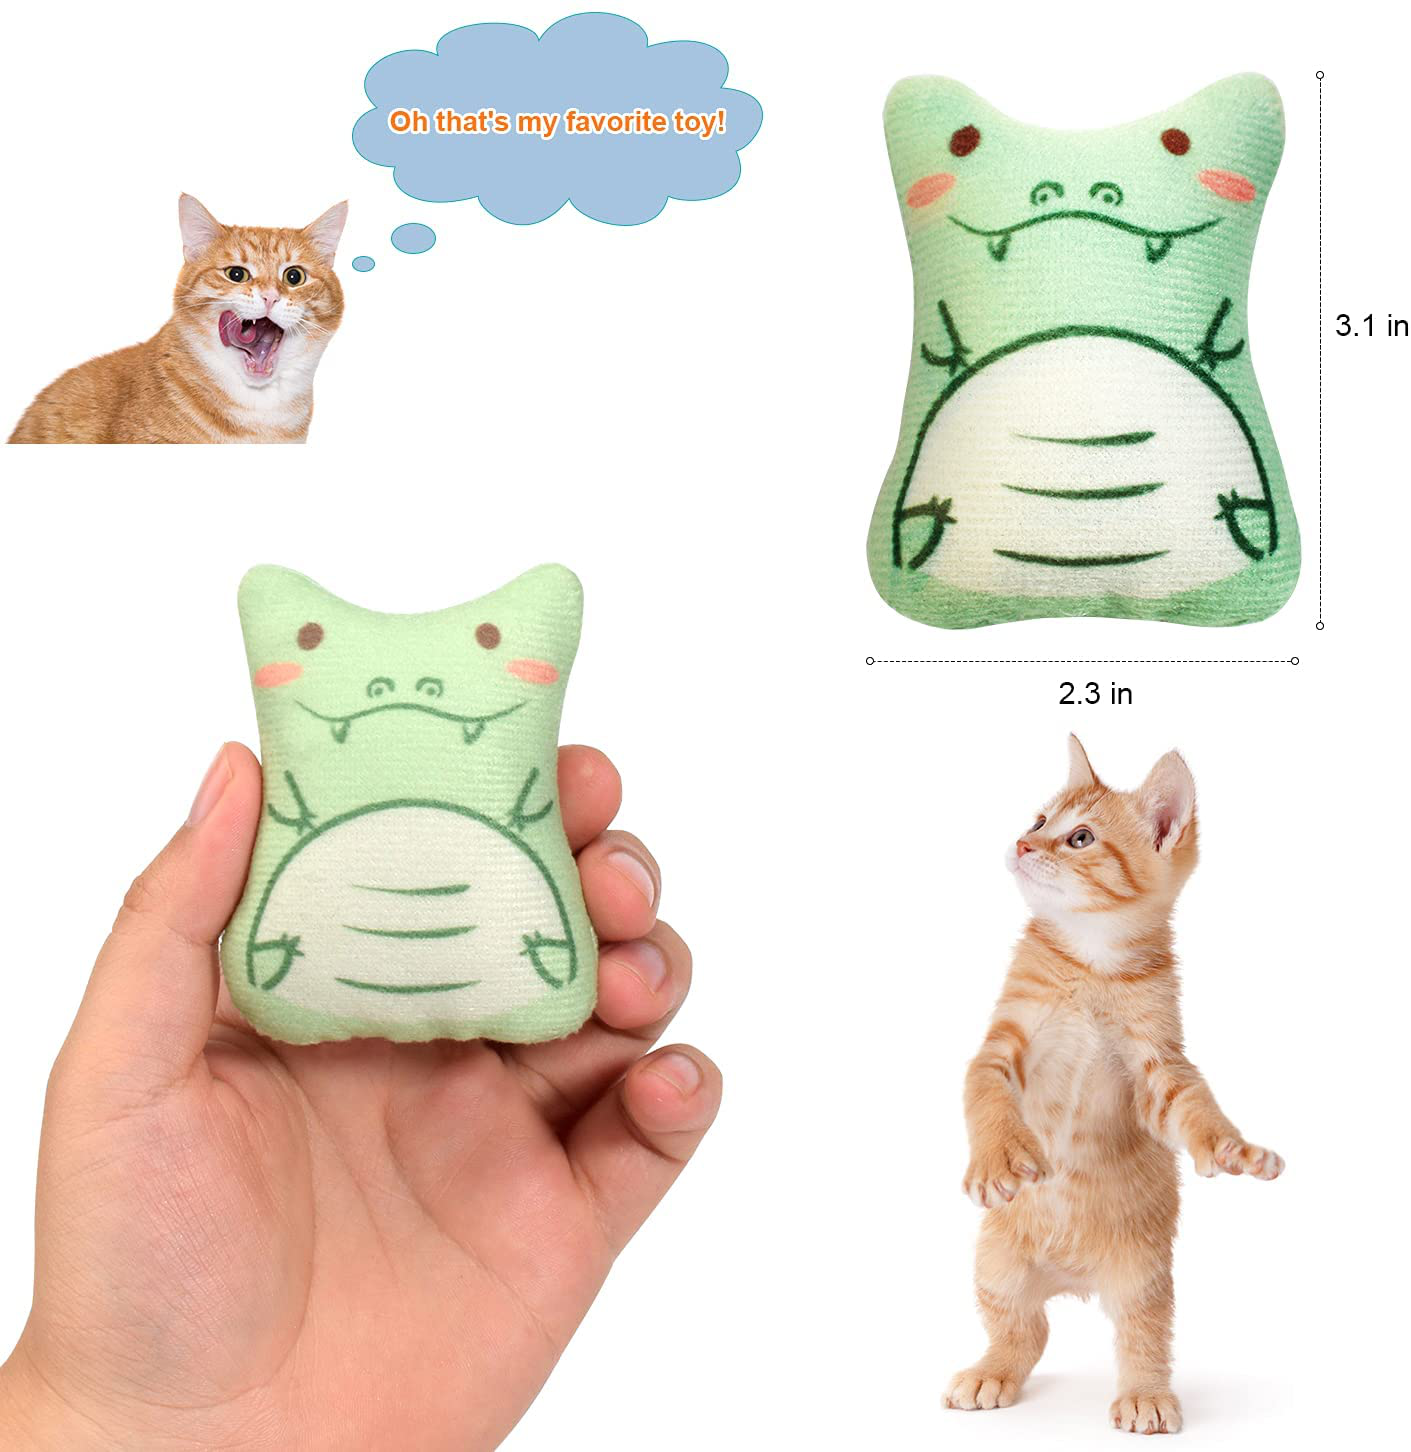 Potaroma Soft Plush Cat Chew Toys Catnip Toys, Cute Cartoon Animal Toys, Bite Resistant Cat Nip Toys for Indoor Cats, Catnip Filled Cat Kicker Toy for Kitty Kitten, Great for Cat Teething Animals & Pet Supplies > Pet Supplies > Cat Supplies > Cat Toys Potaroma   